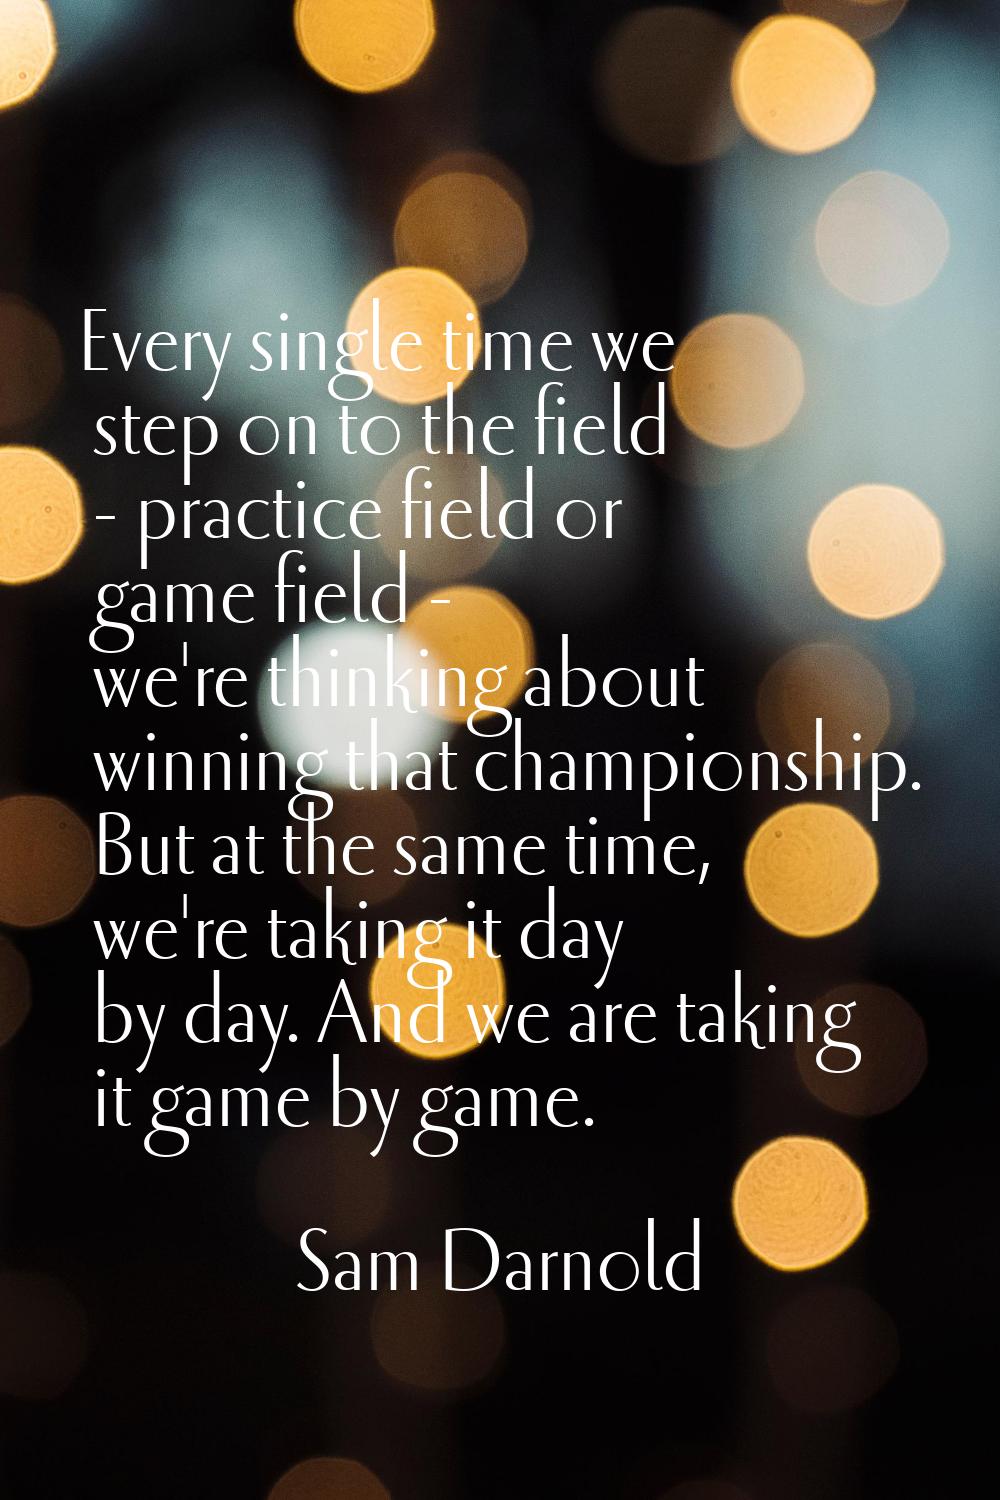 Every single time we step on to the field - practice field or game field - we're thinking about win